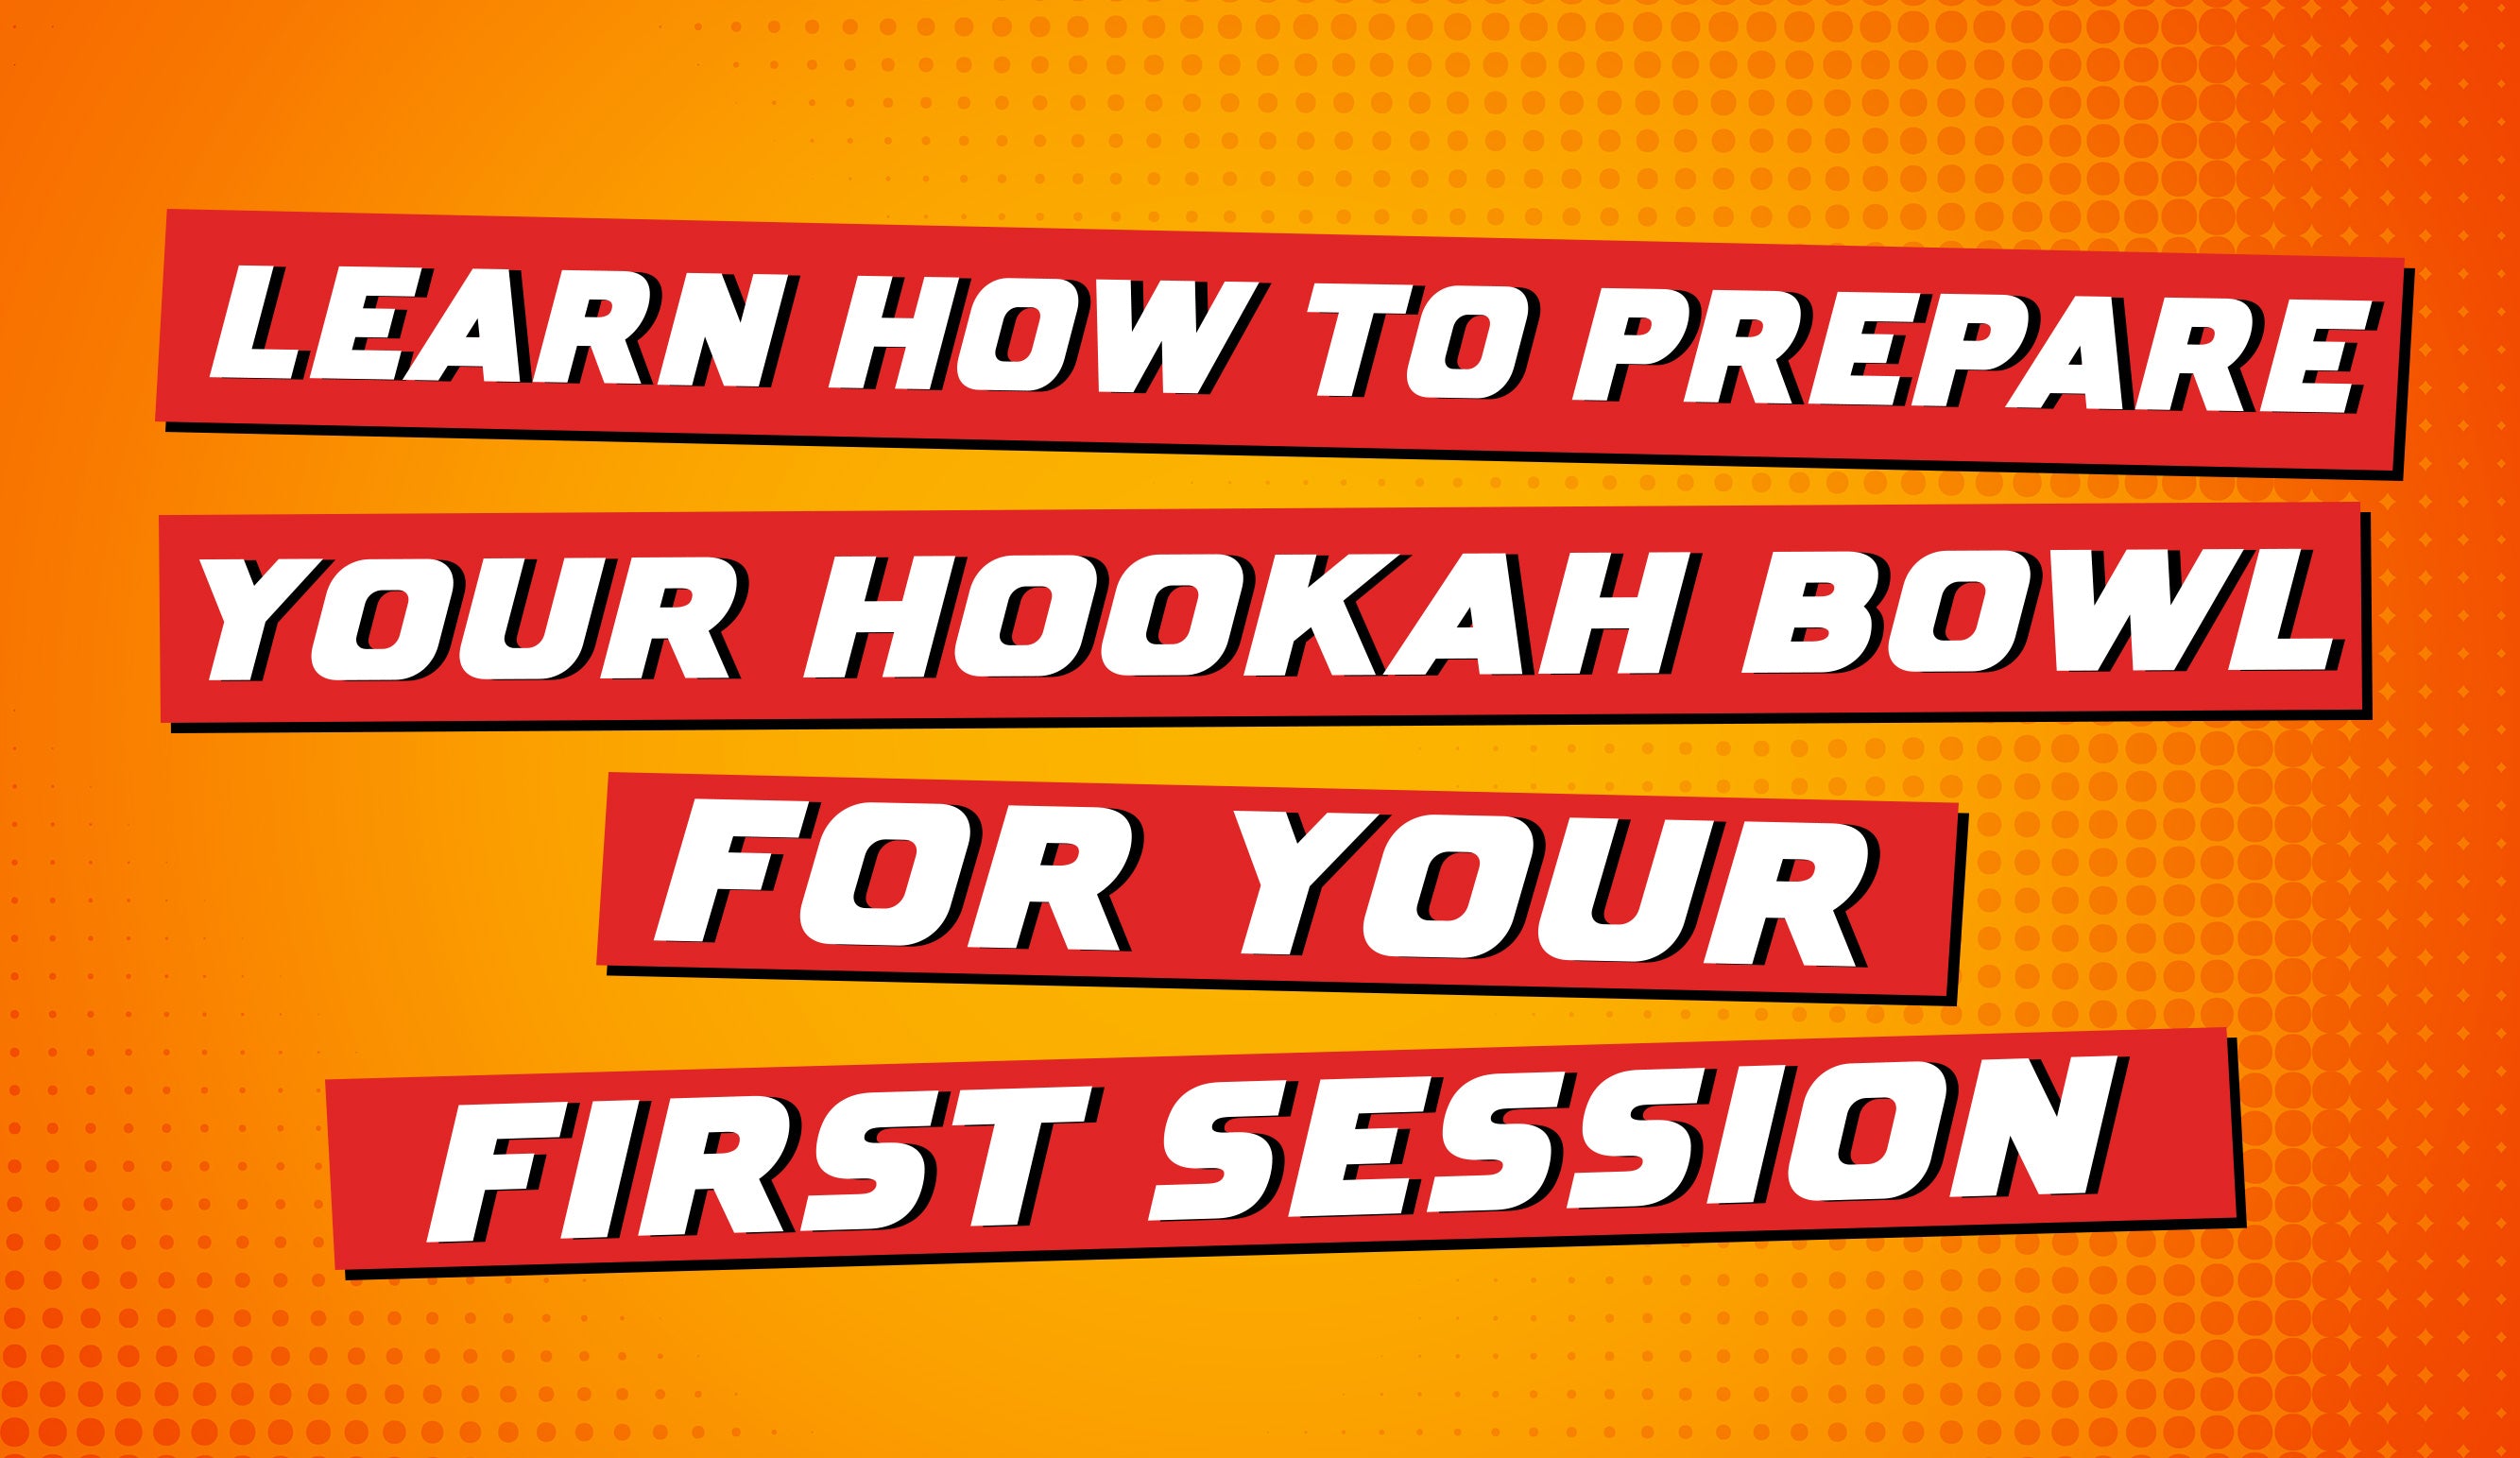 Learn How to Prepare Your Hookah Bowl for Your First Session